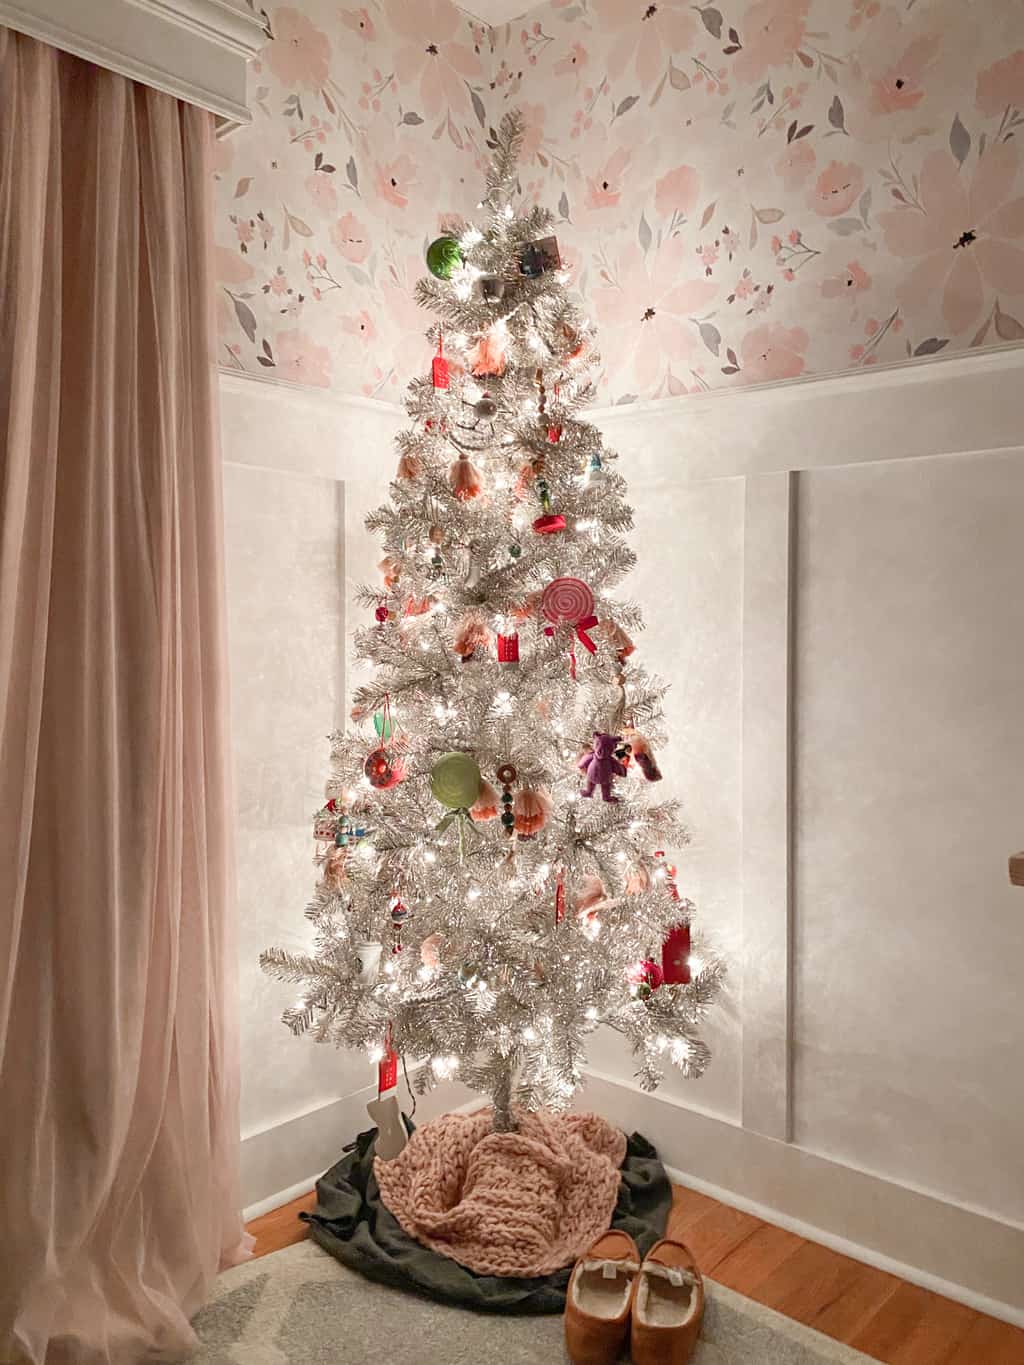 Decorating a girls room for the holidays is so much fun. This post shares simple Girls Bedroom Christmas Decor that will make the room festive and fun.